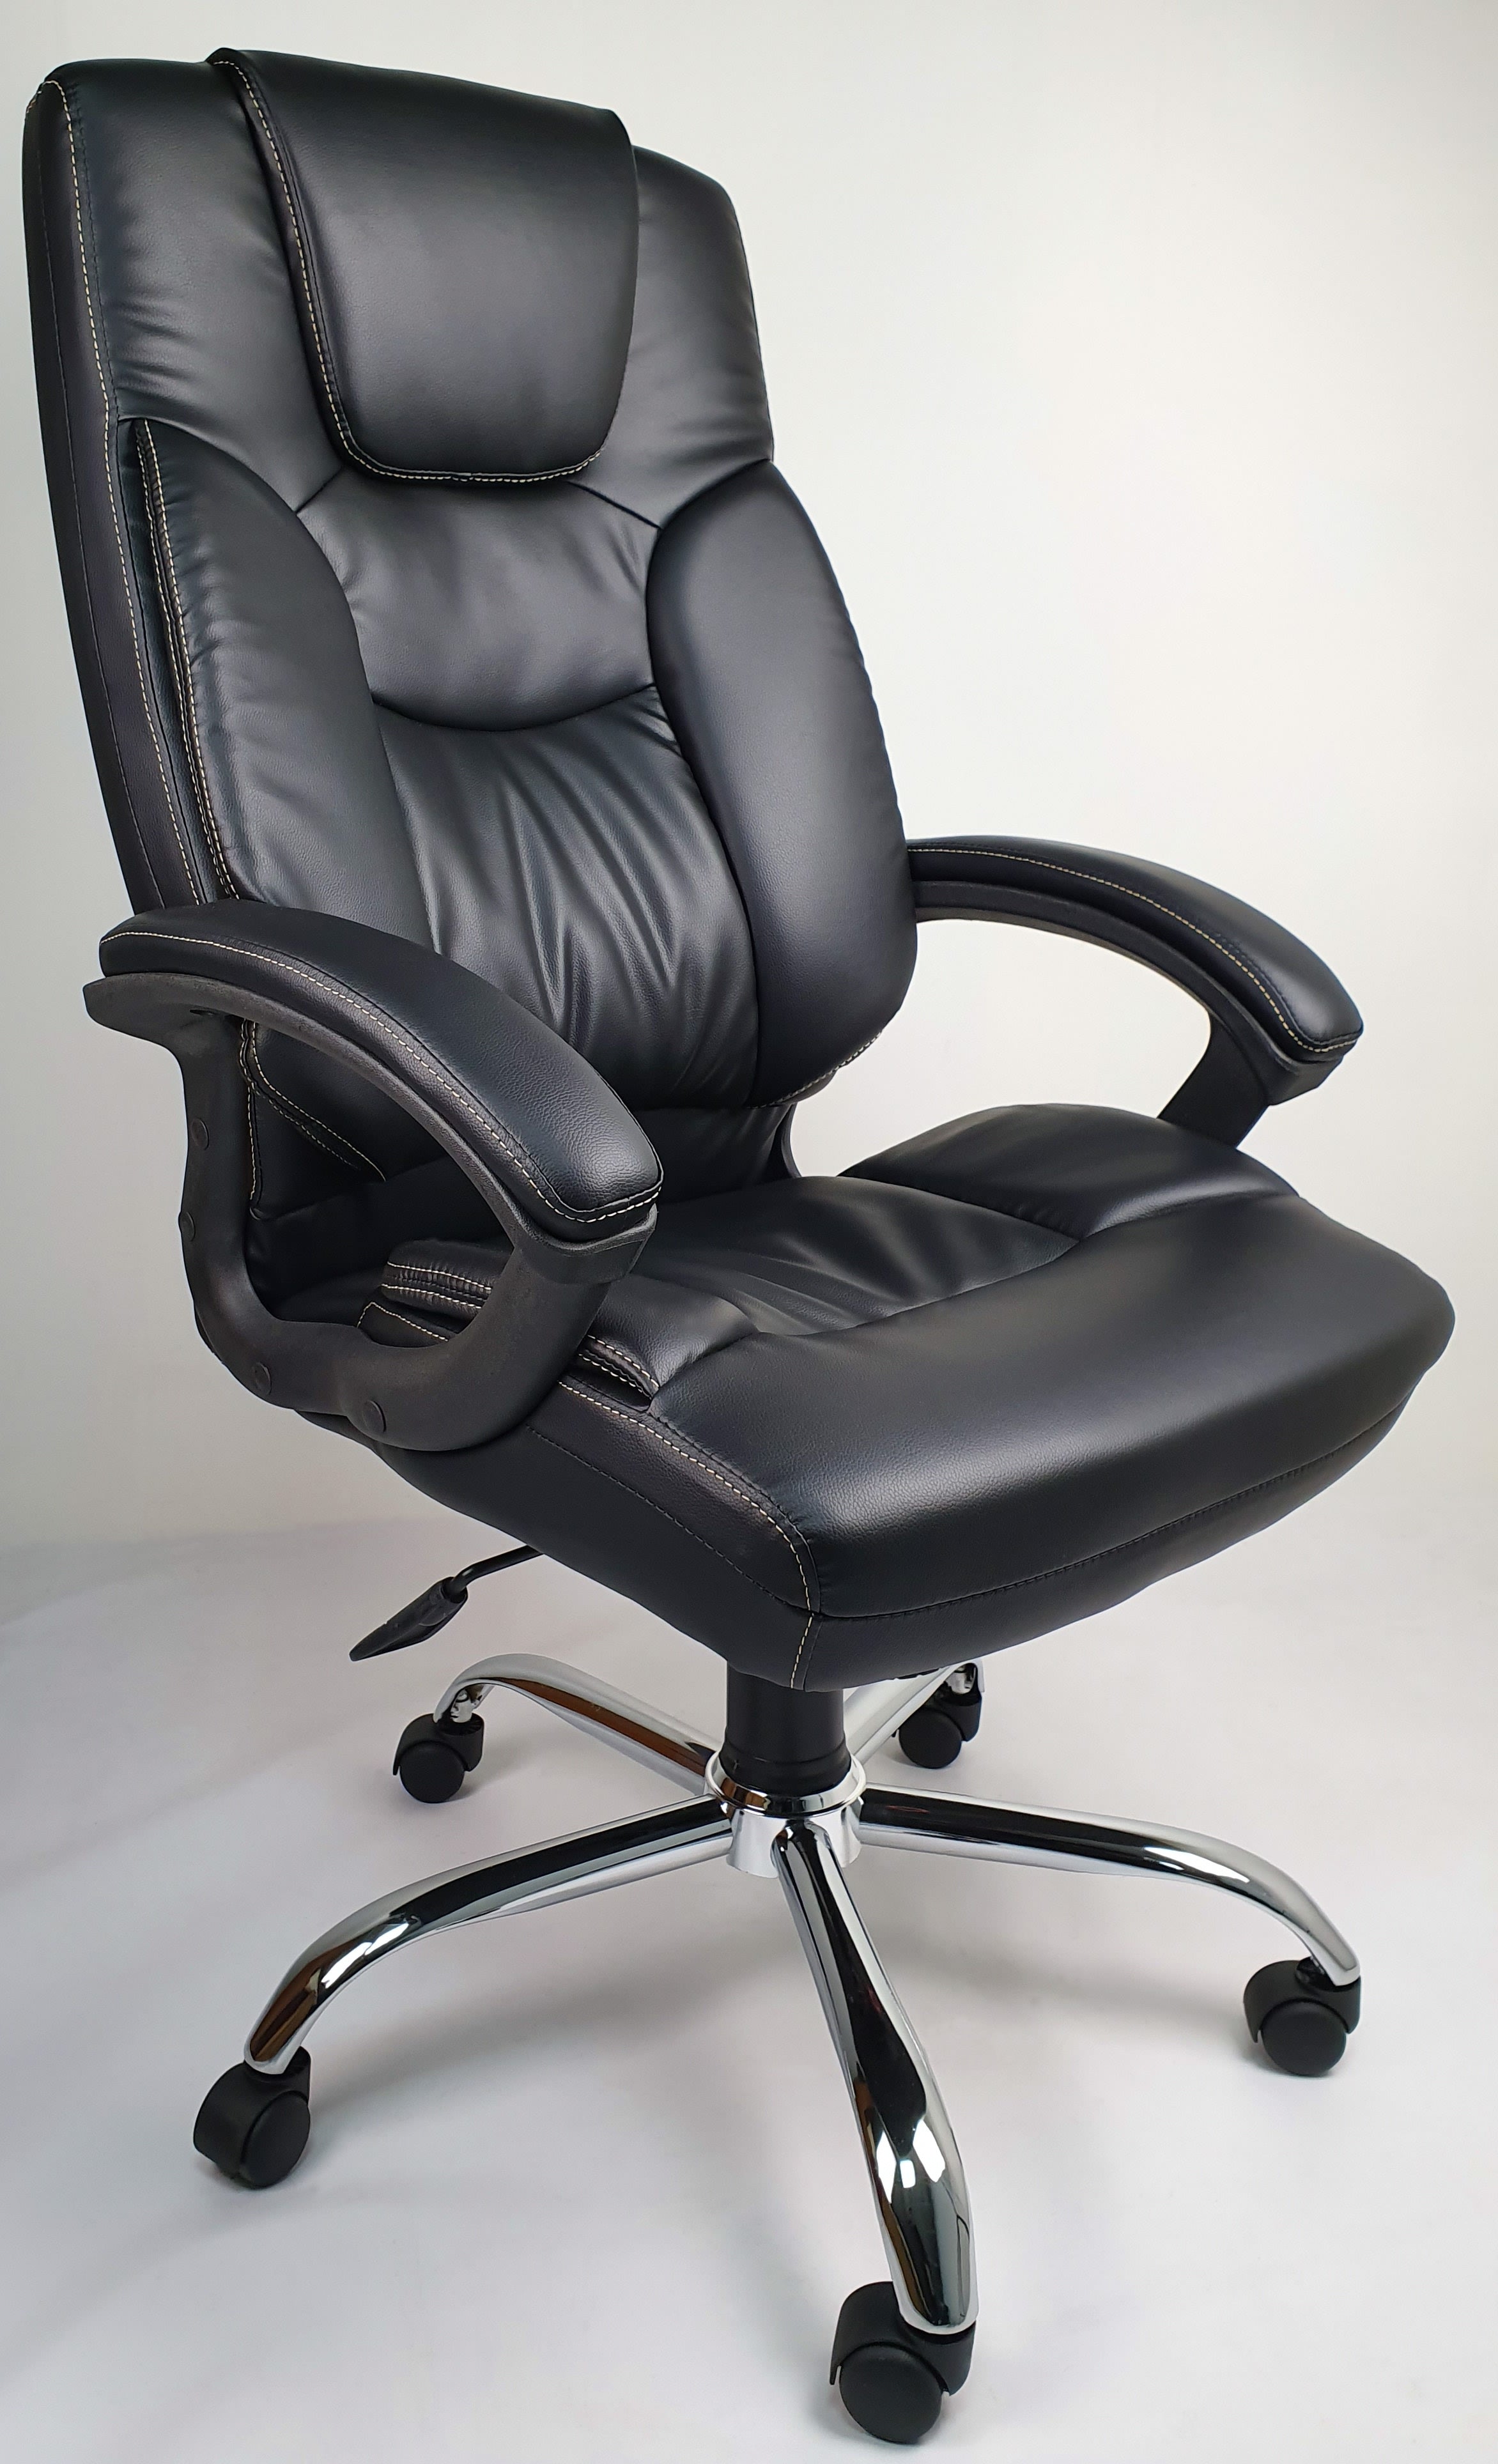 Black Leather Executive Office Chair - HF459